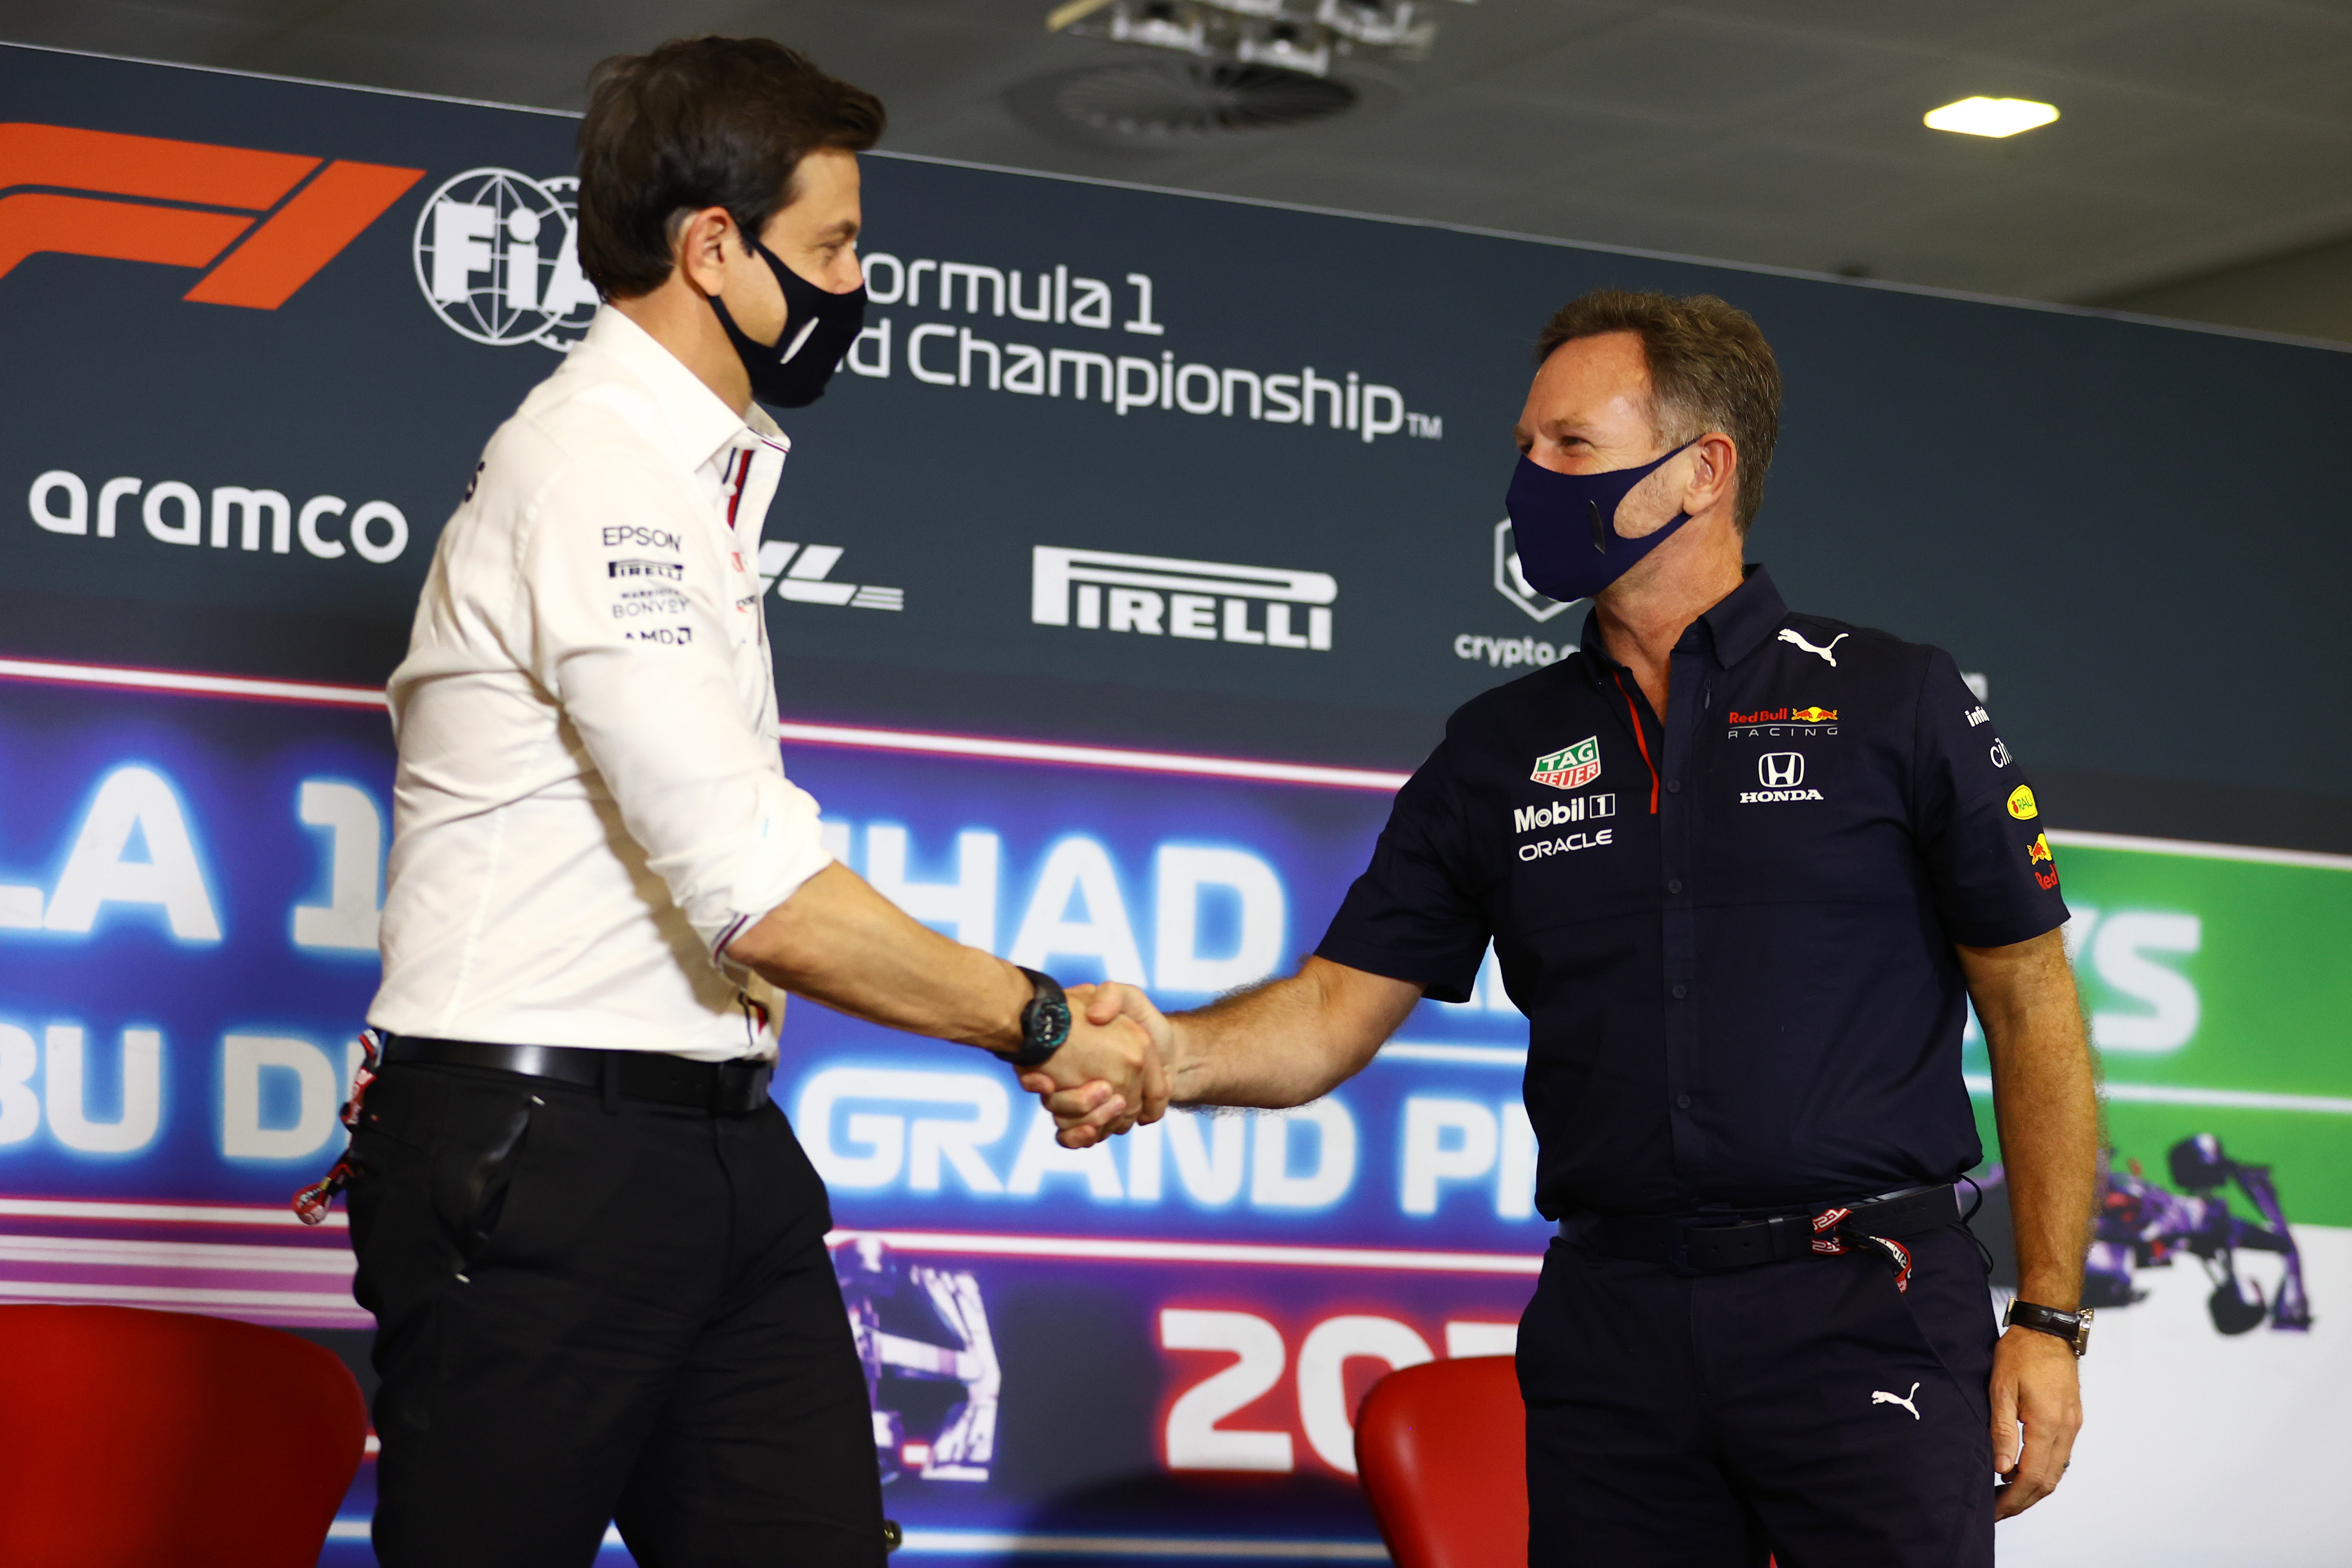 Toto Wolff and Christian Horner shake hands in the team principals press conference ahead of the Abu Dhabi Grand Prix.